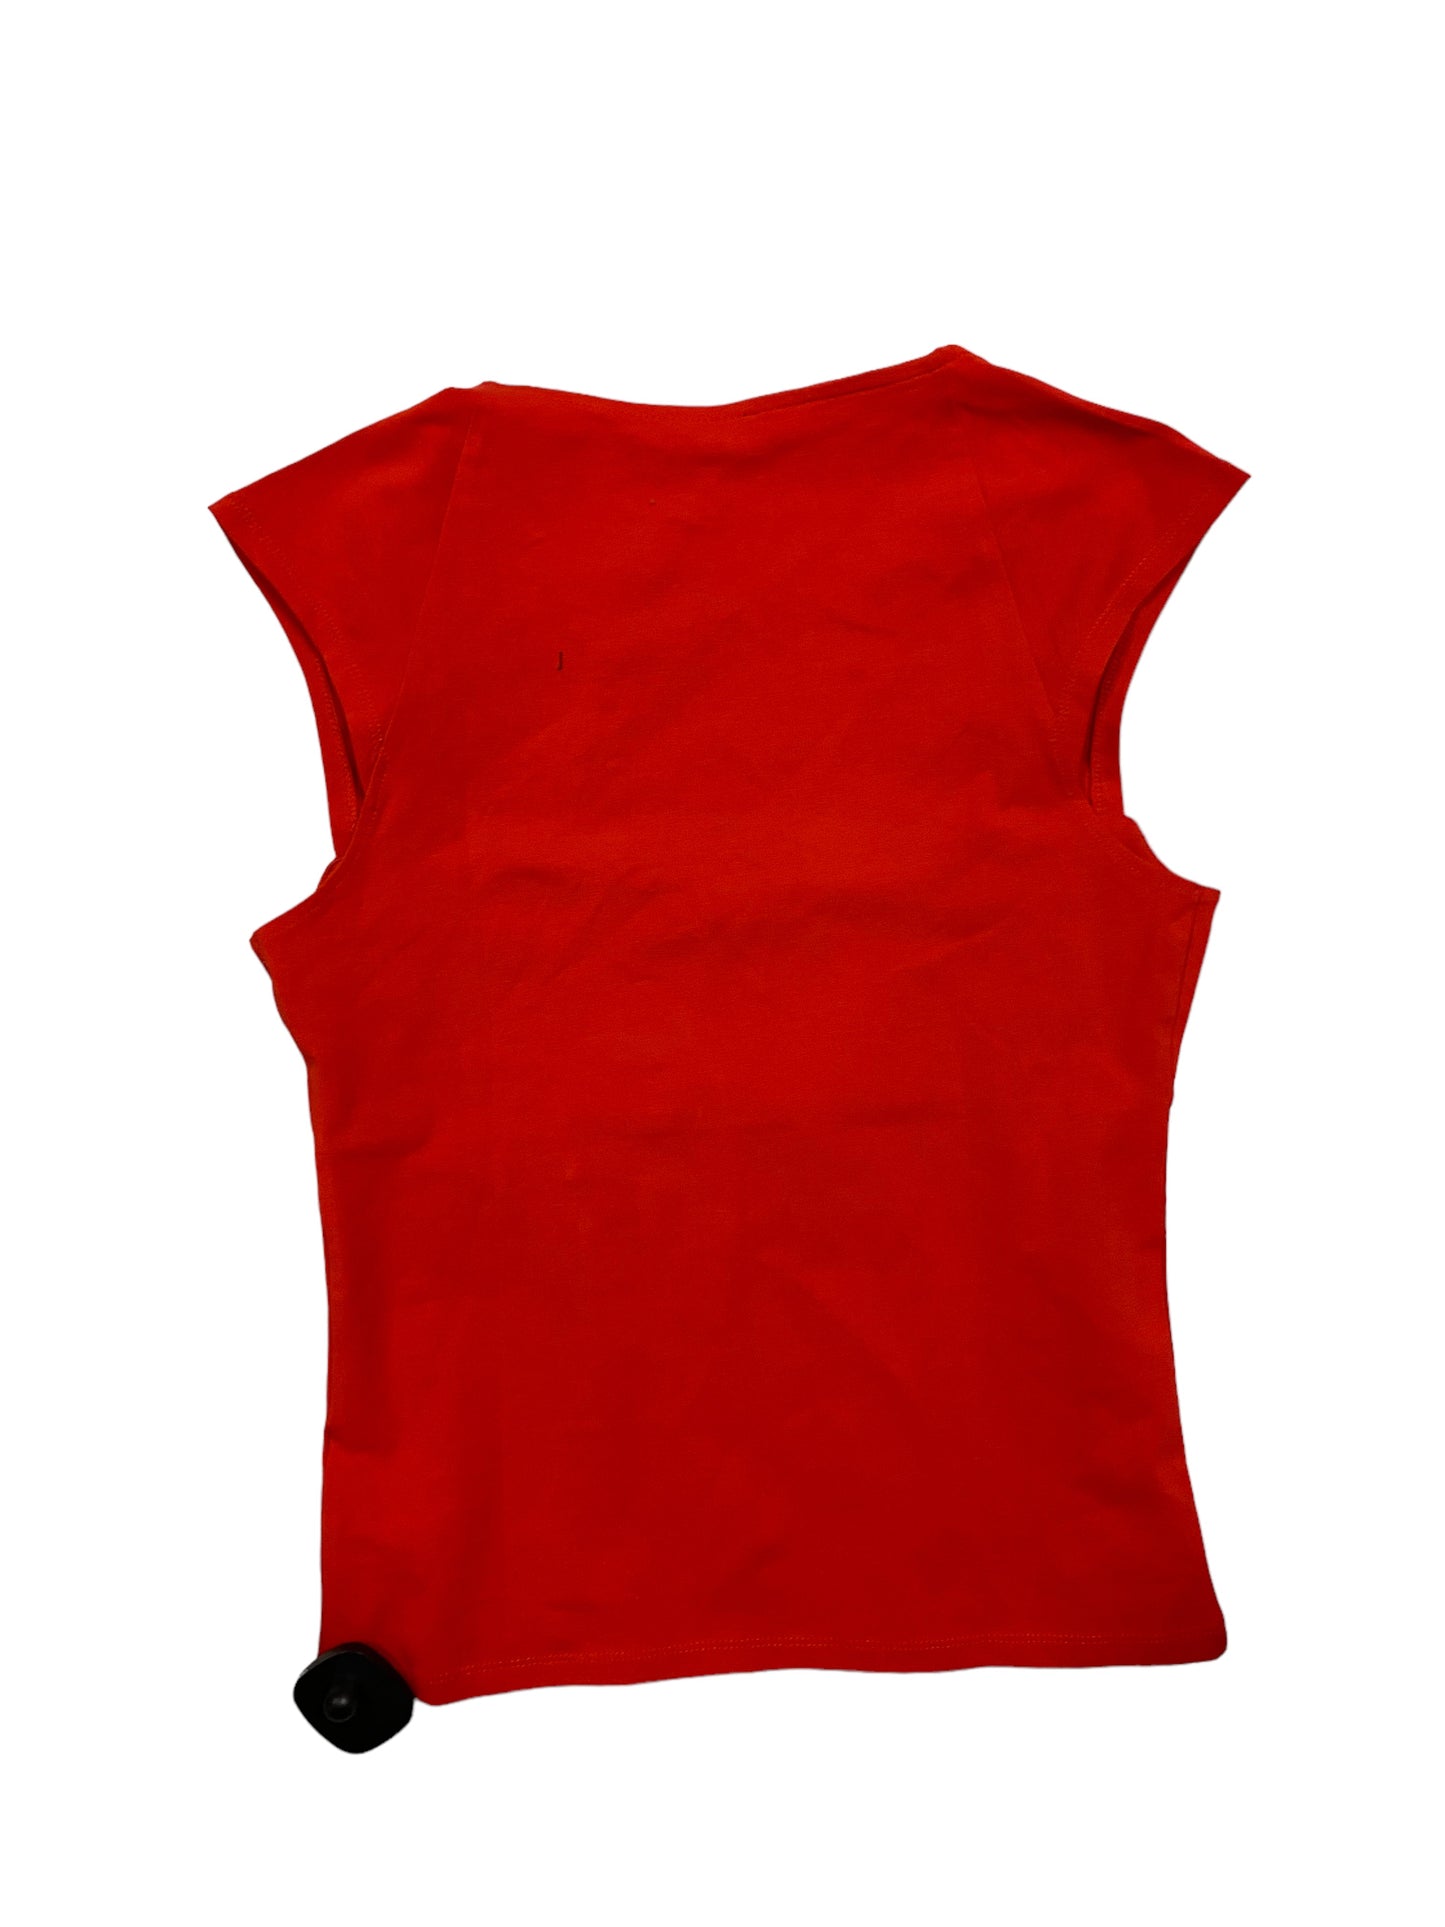 Red Top Short Sleeve J. Crew, Size M